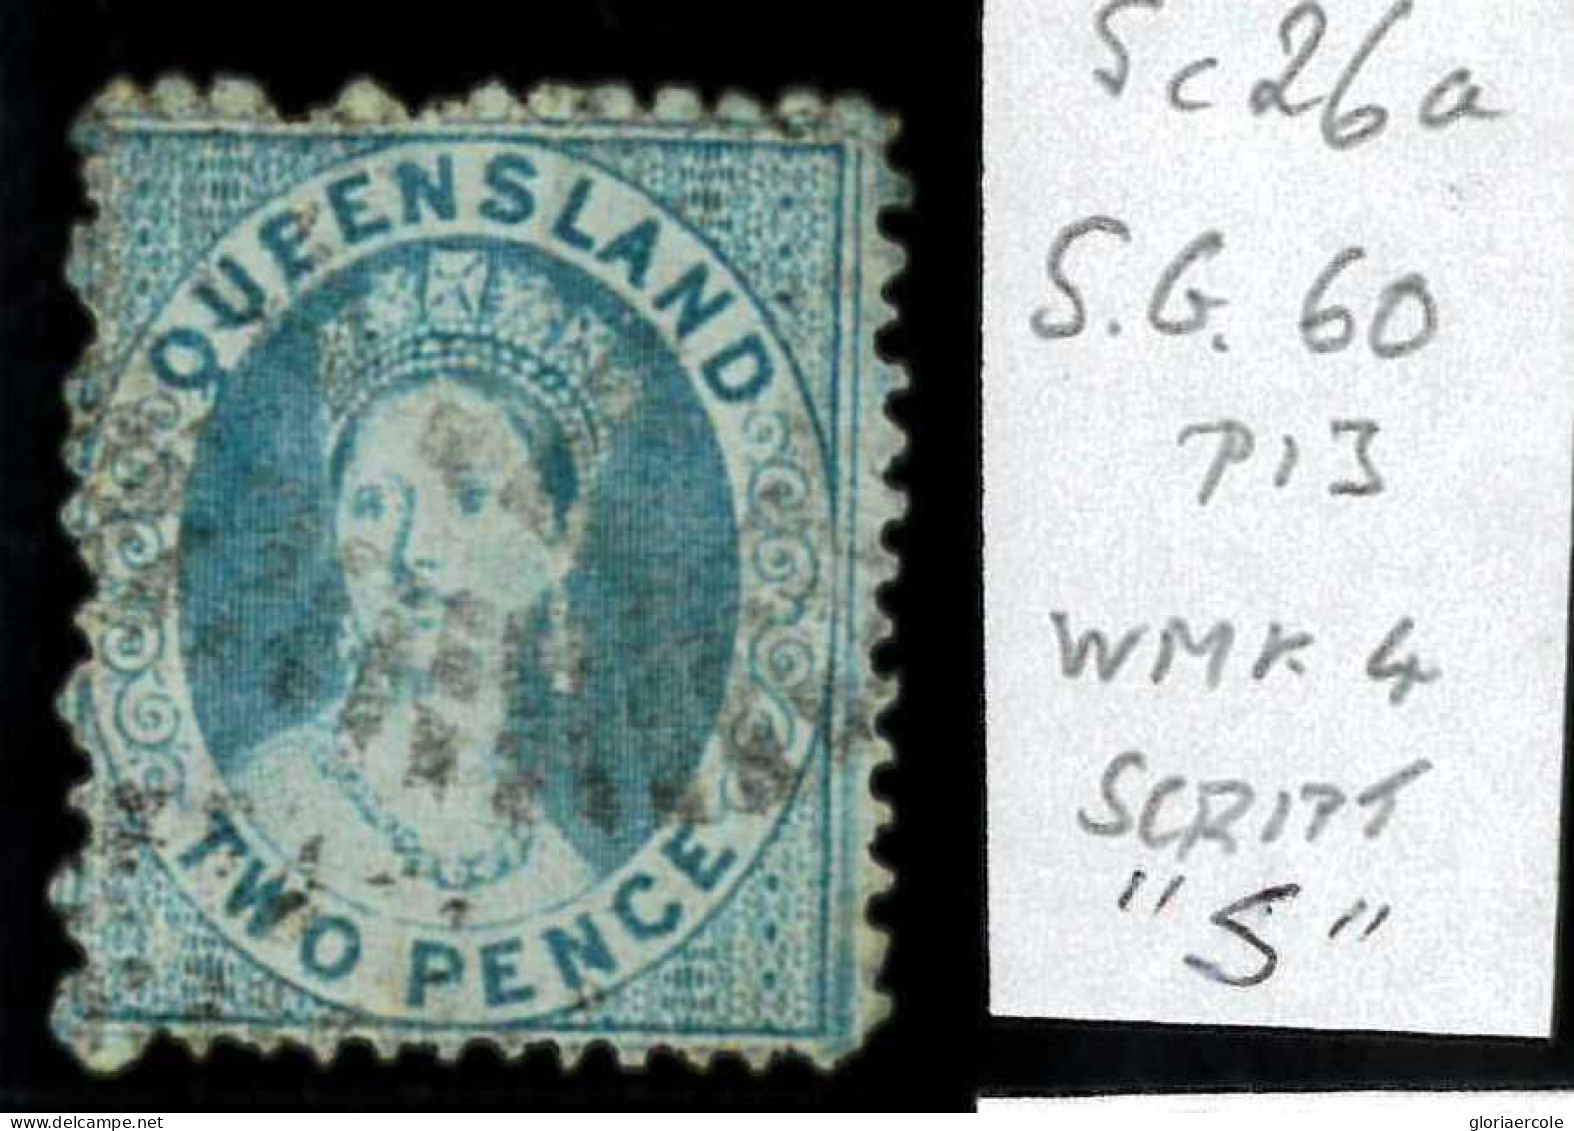 Aa5619e - Australia QUEENSLAND - STAMP - SG # 60  Watermark 4 + SCRIPT S - USED - Mint Stamps